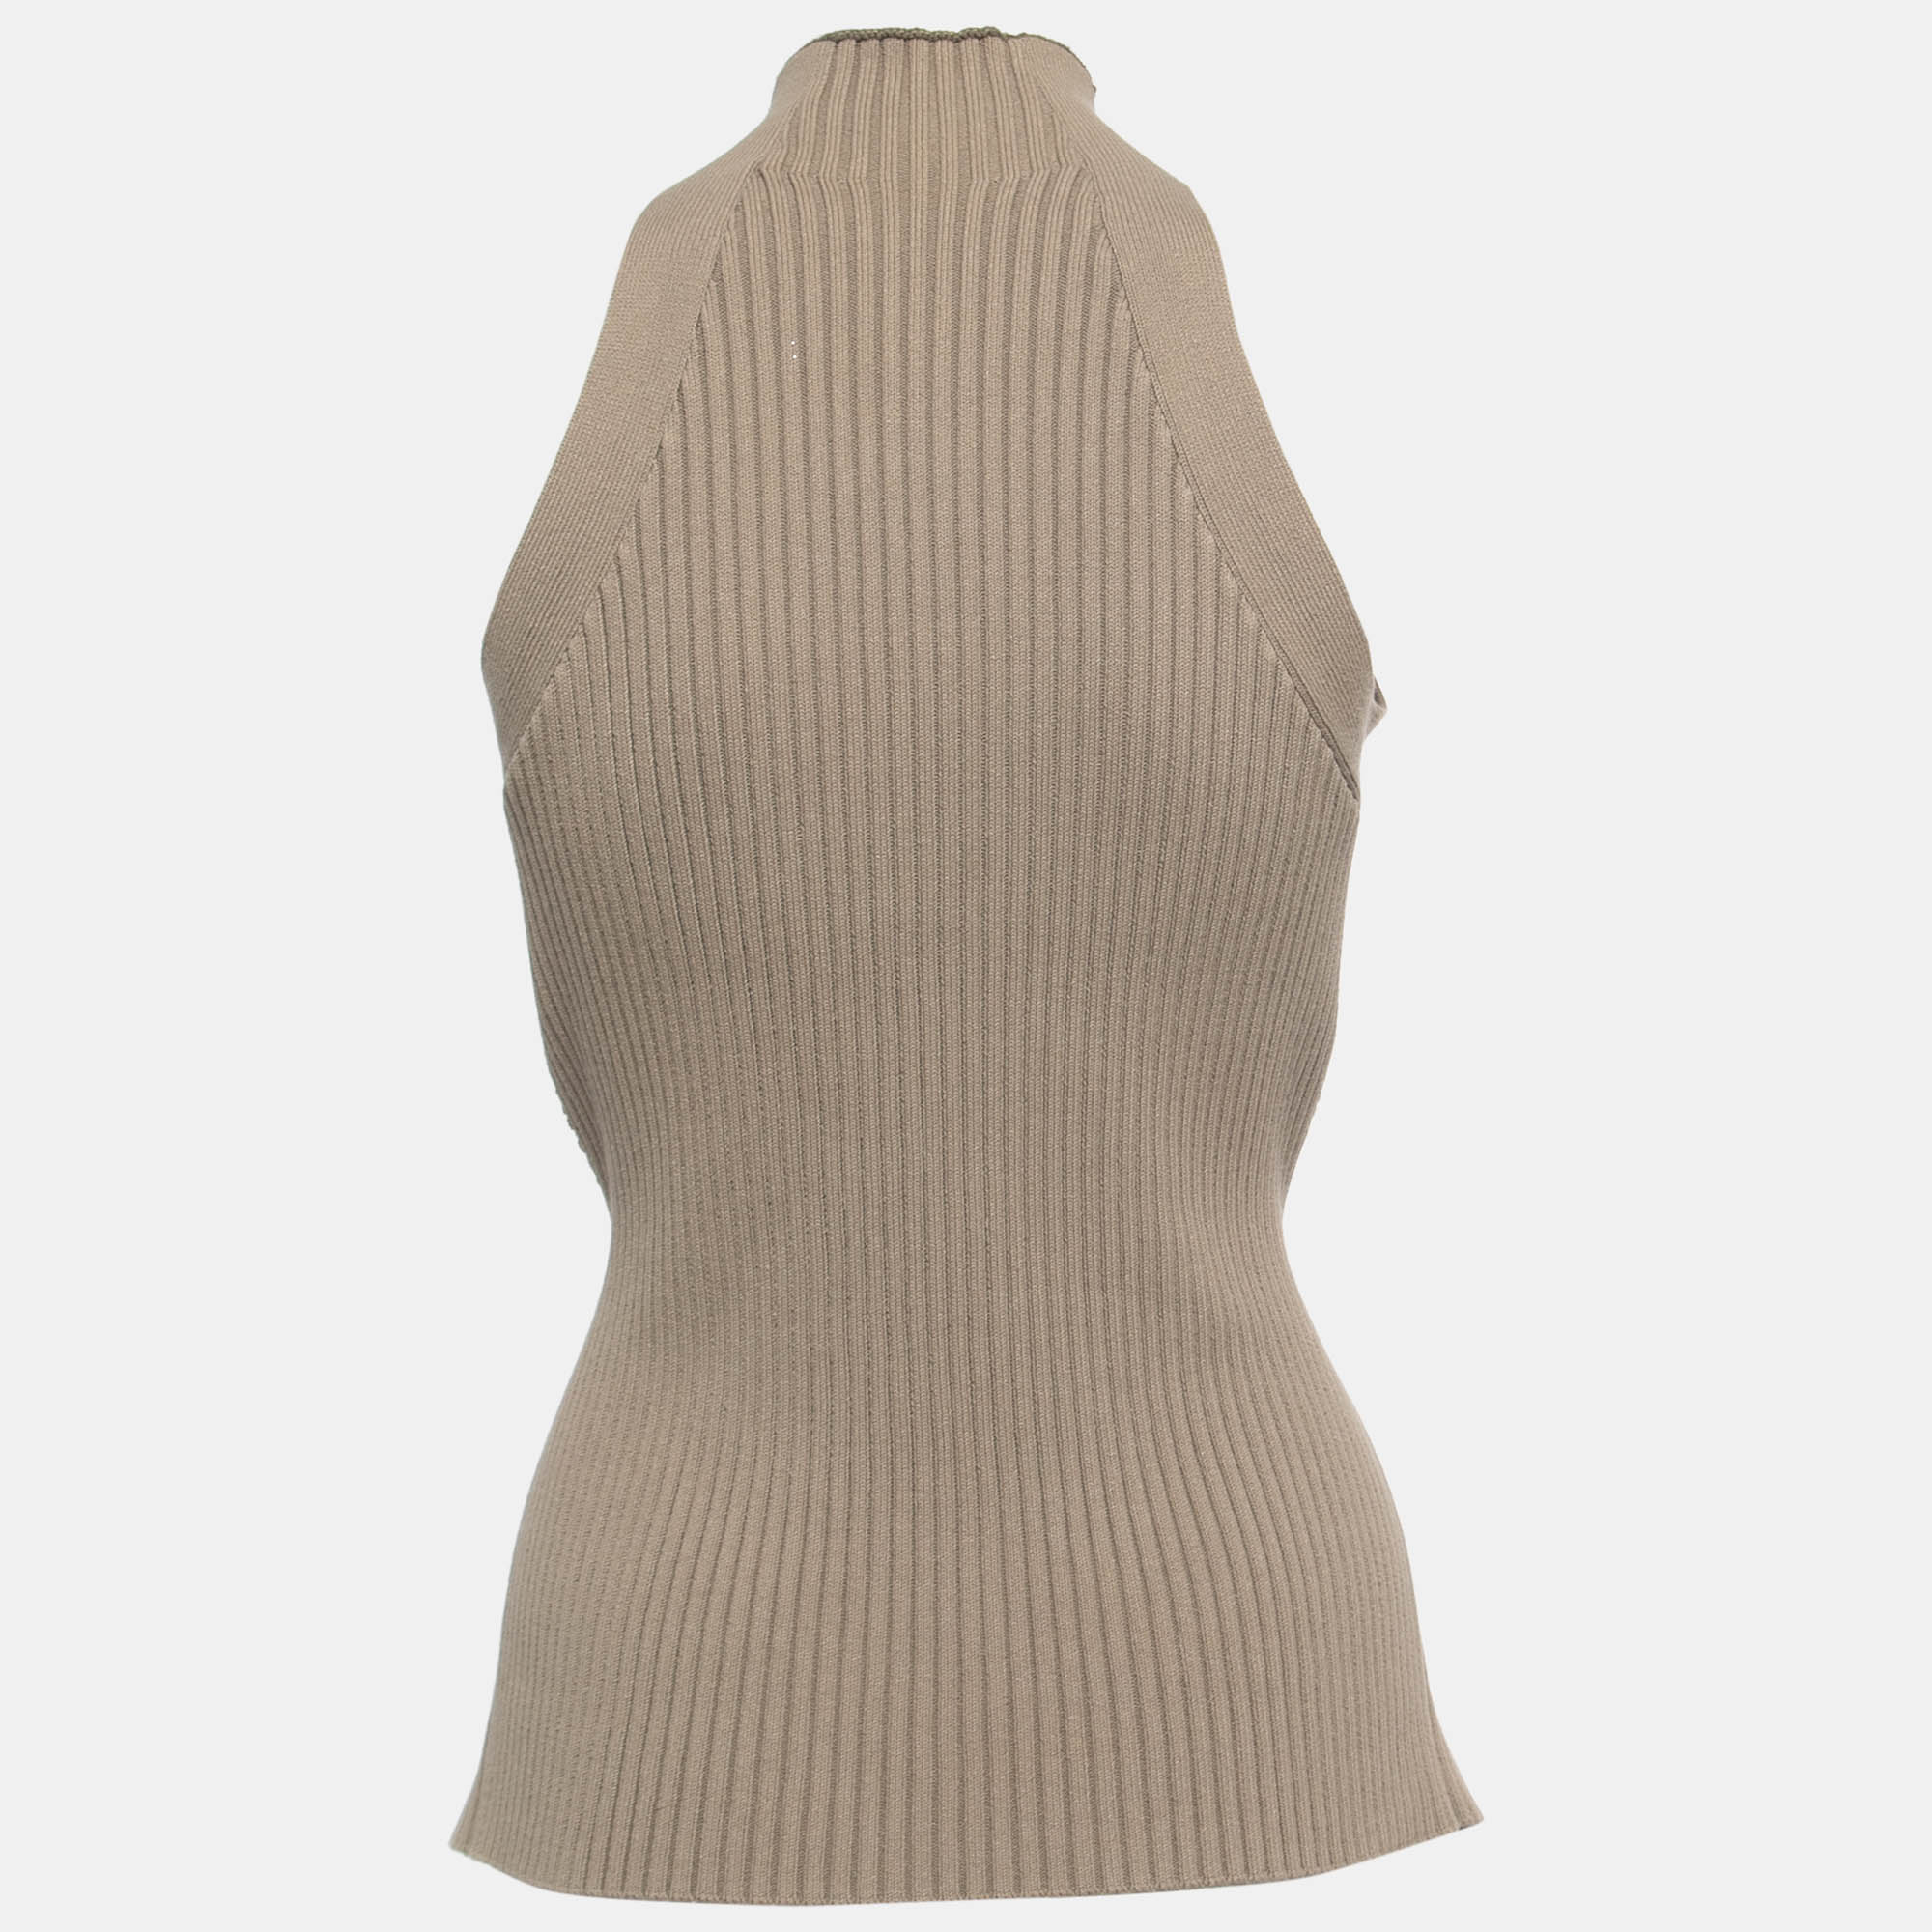 

Dion Lee Beige Knit Twisted Cut Out Sleeveless Top